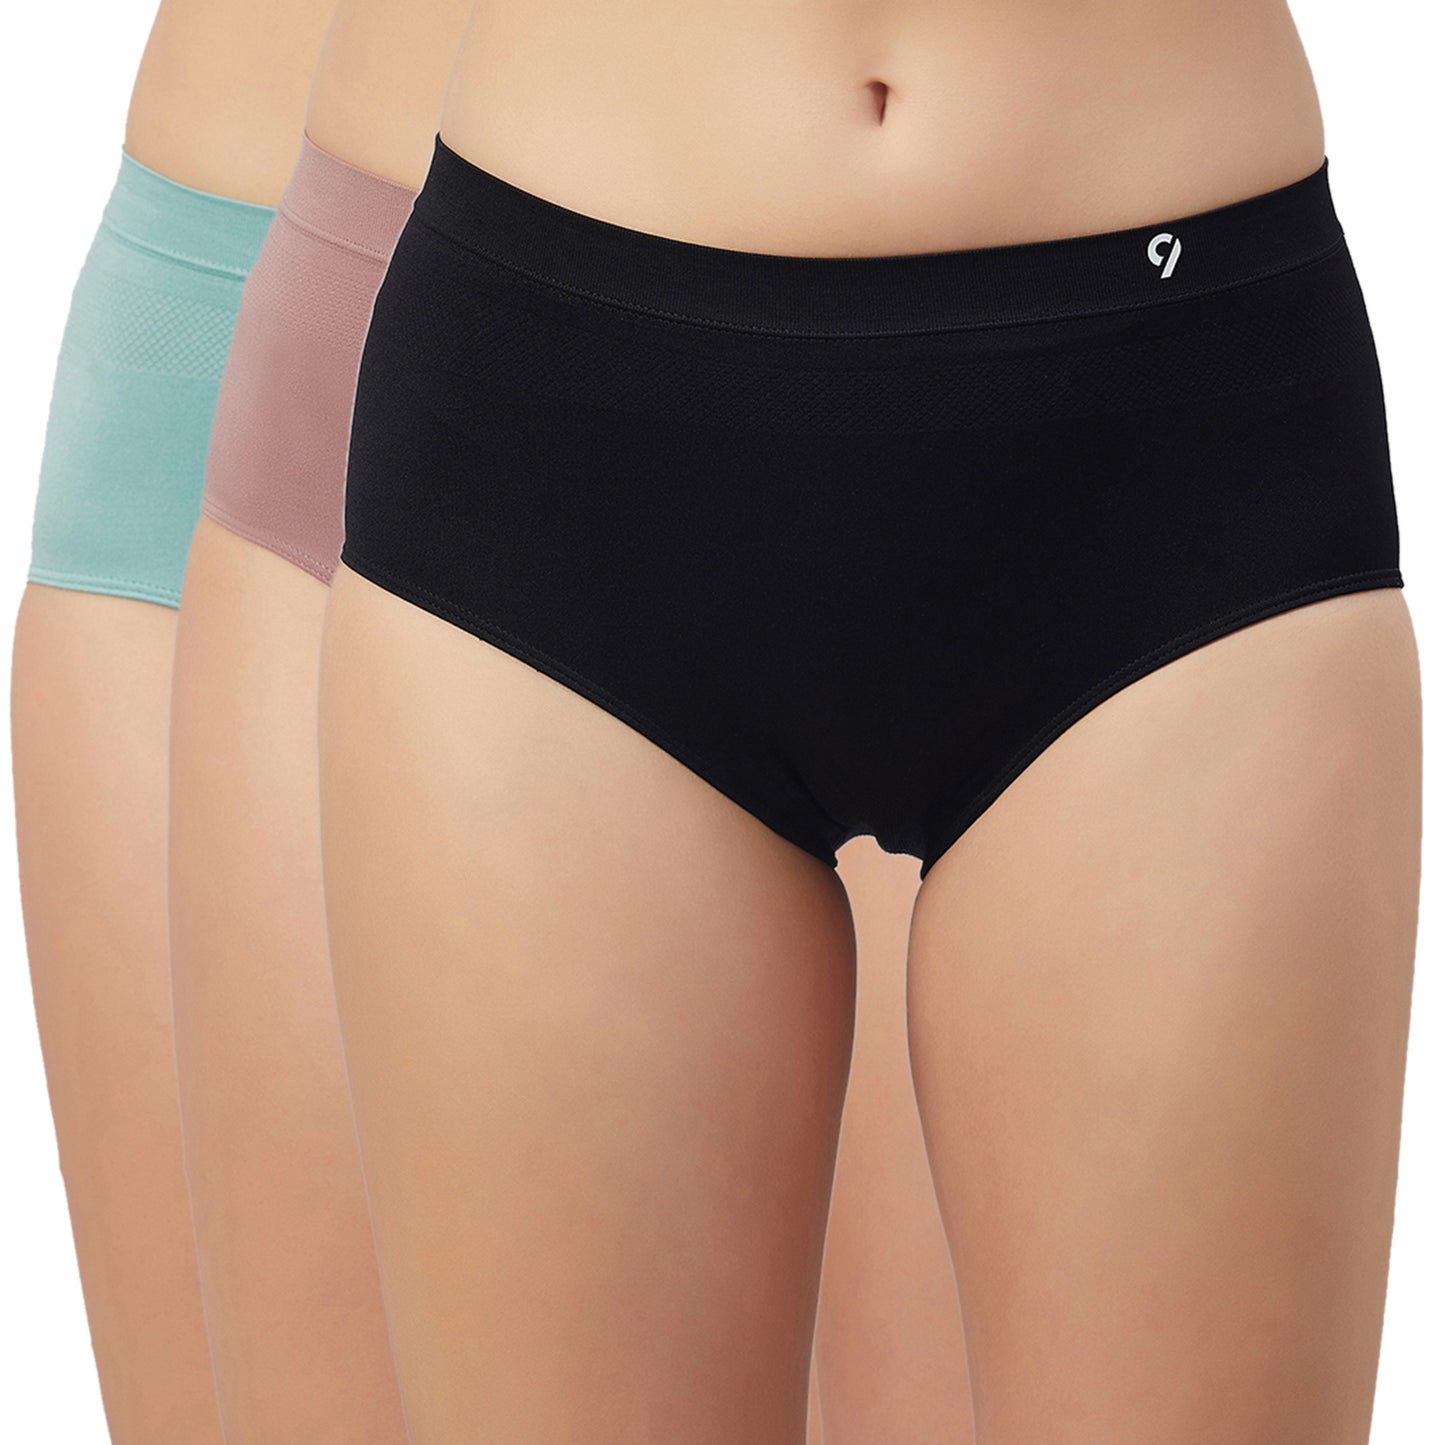 C9 AIRWEAR Women's Solid Hipster Panty Combo (5 Packs)